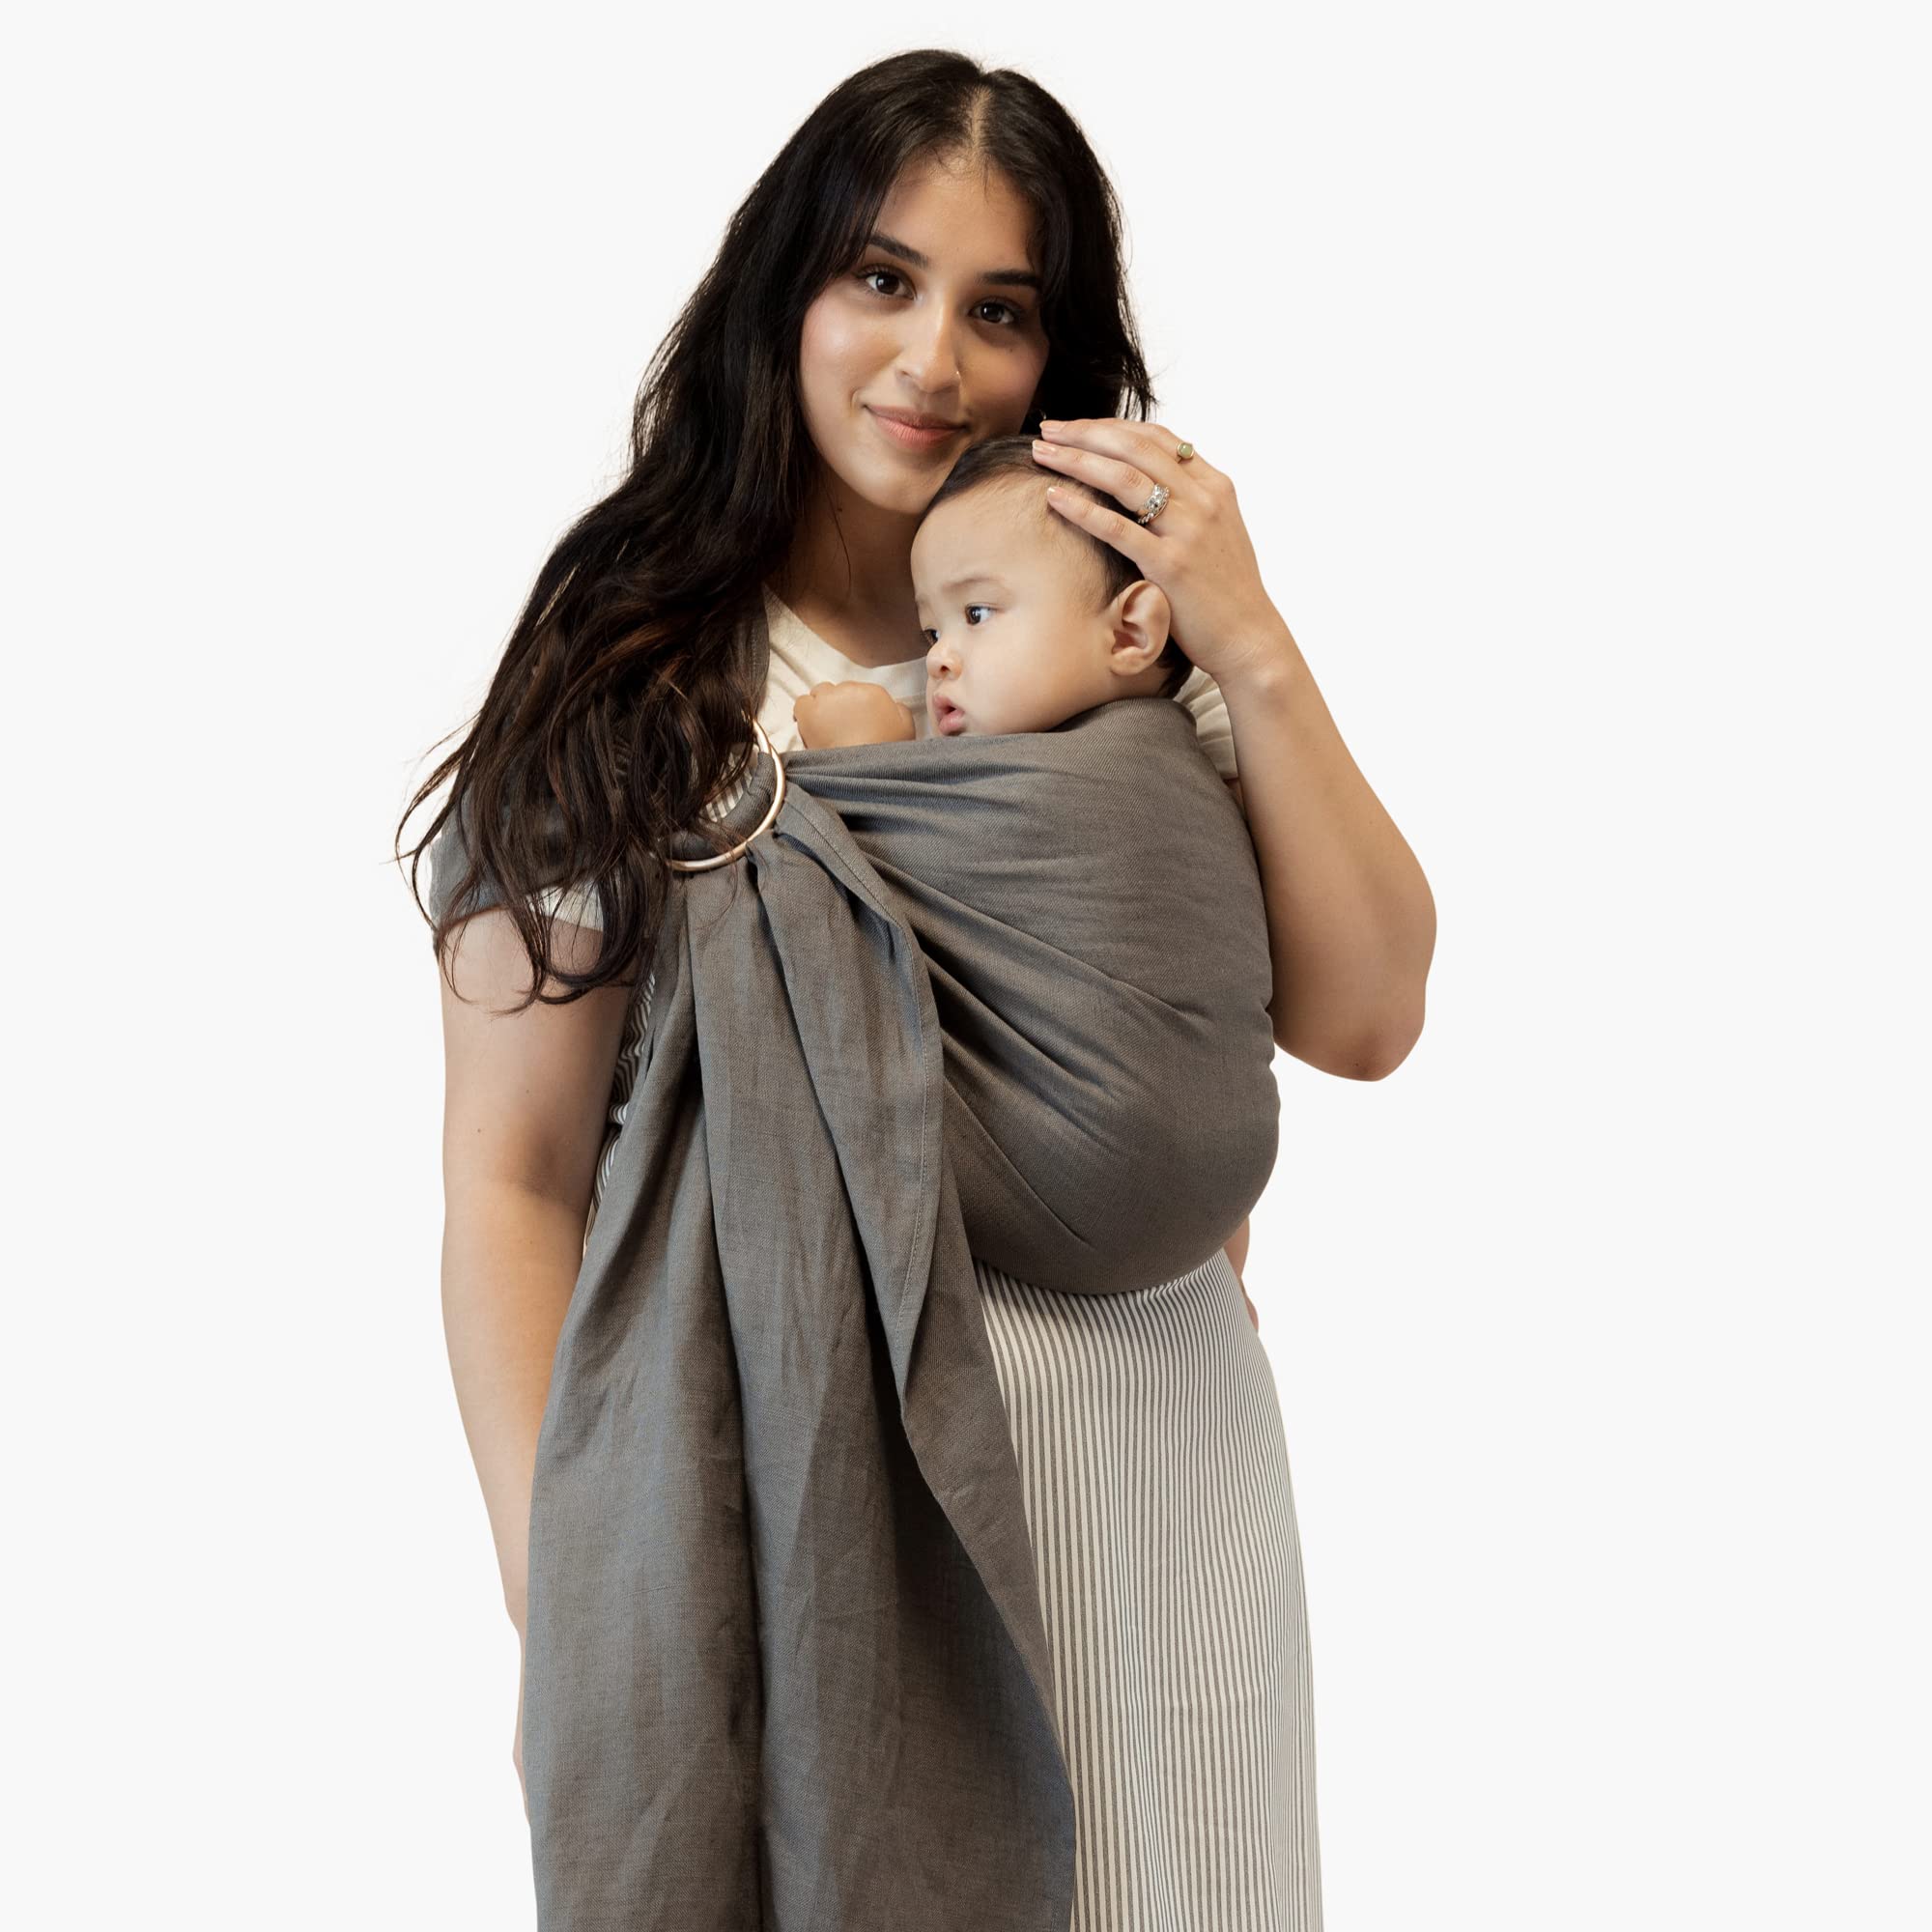 WildBird Ring Sling Baby Carrier for New Moms & Dads & Caregivers - Made from 100% Belgium Linen - for Newborns to Toddlers Up to 35 lbs - Standard 74